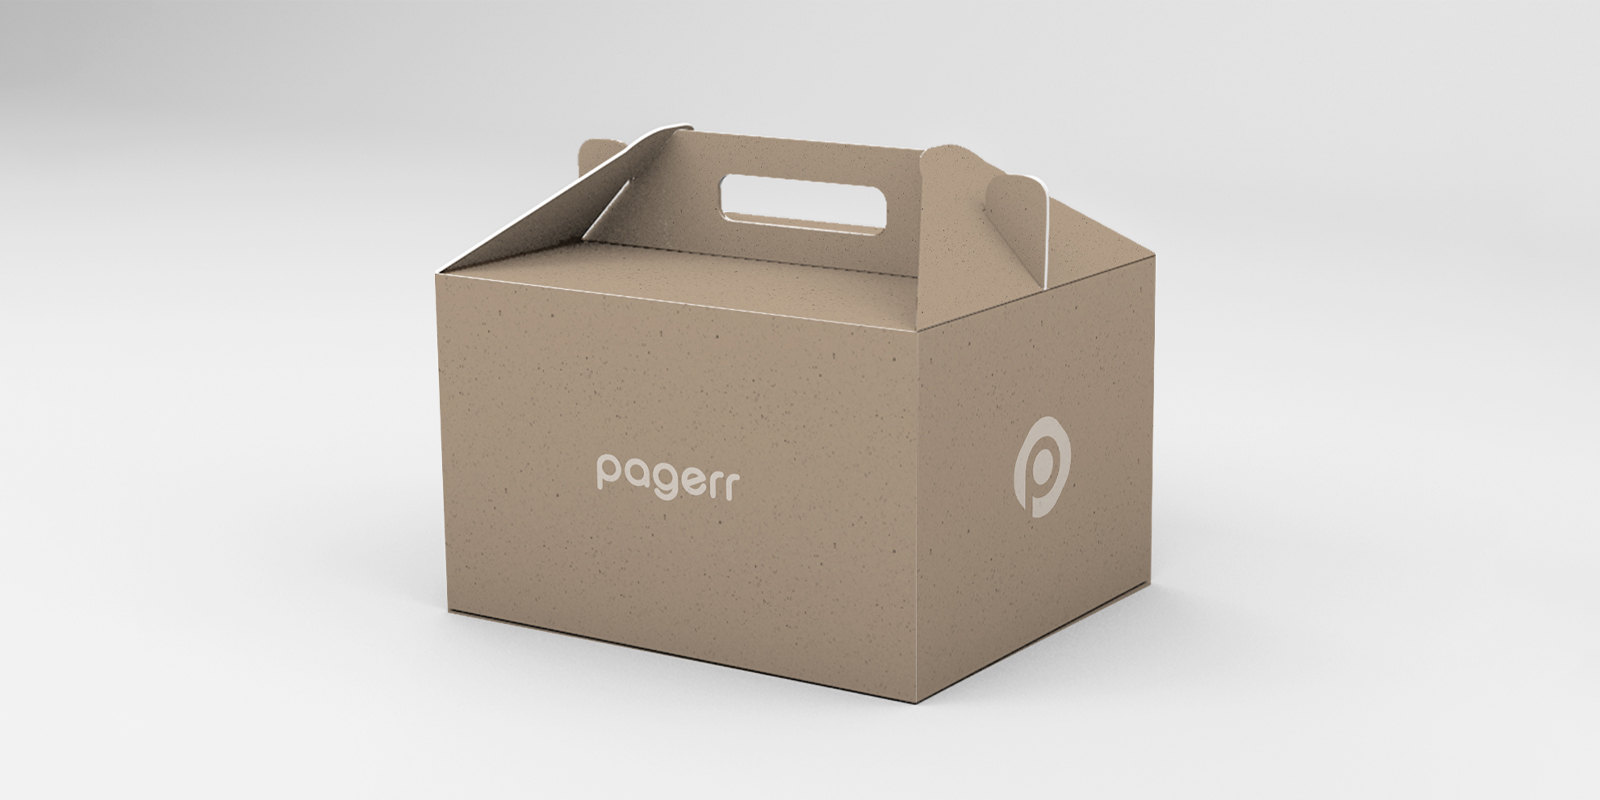 Takeaway boxes in Newcastle - Print with Pagerr